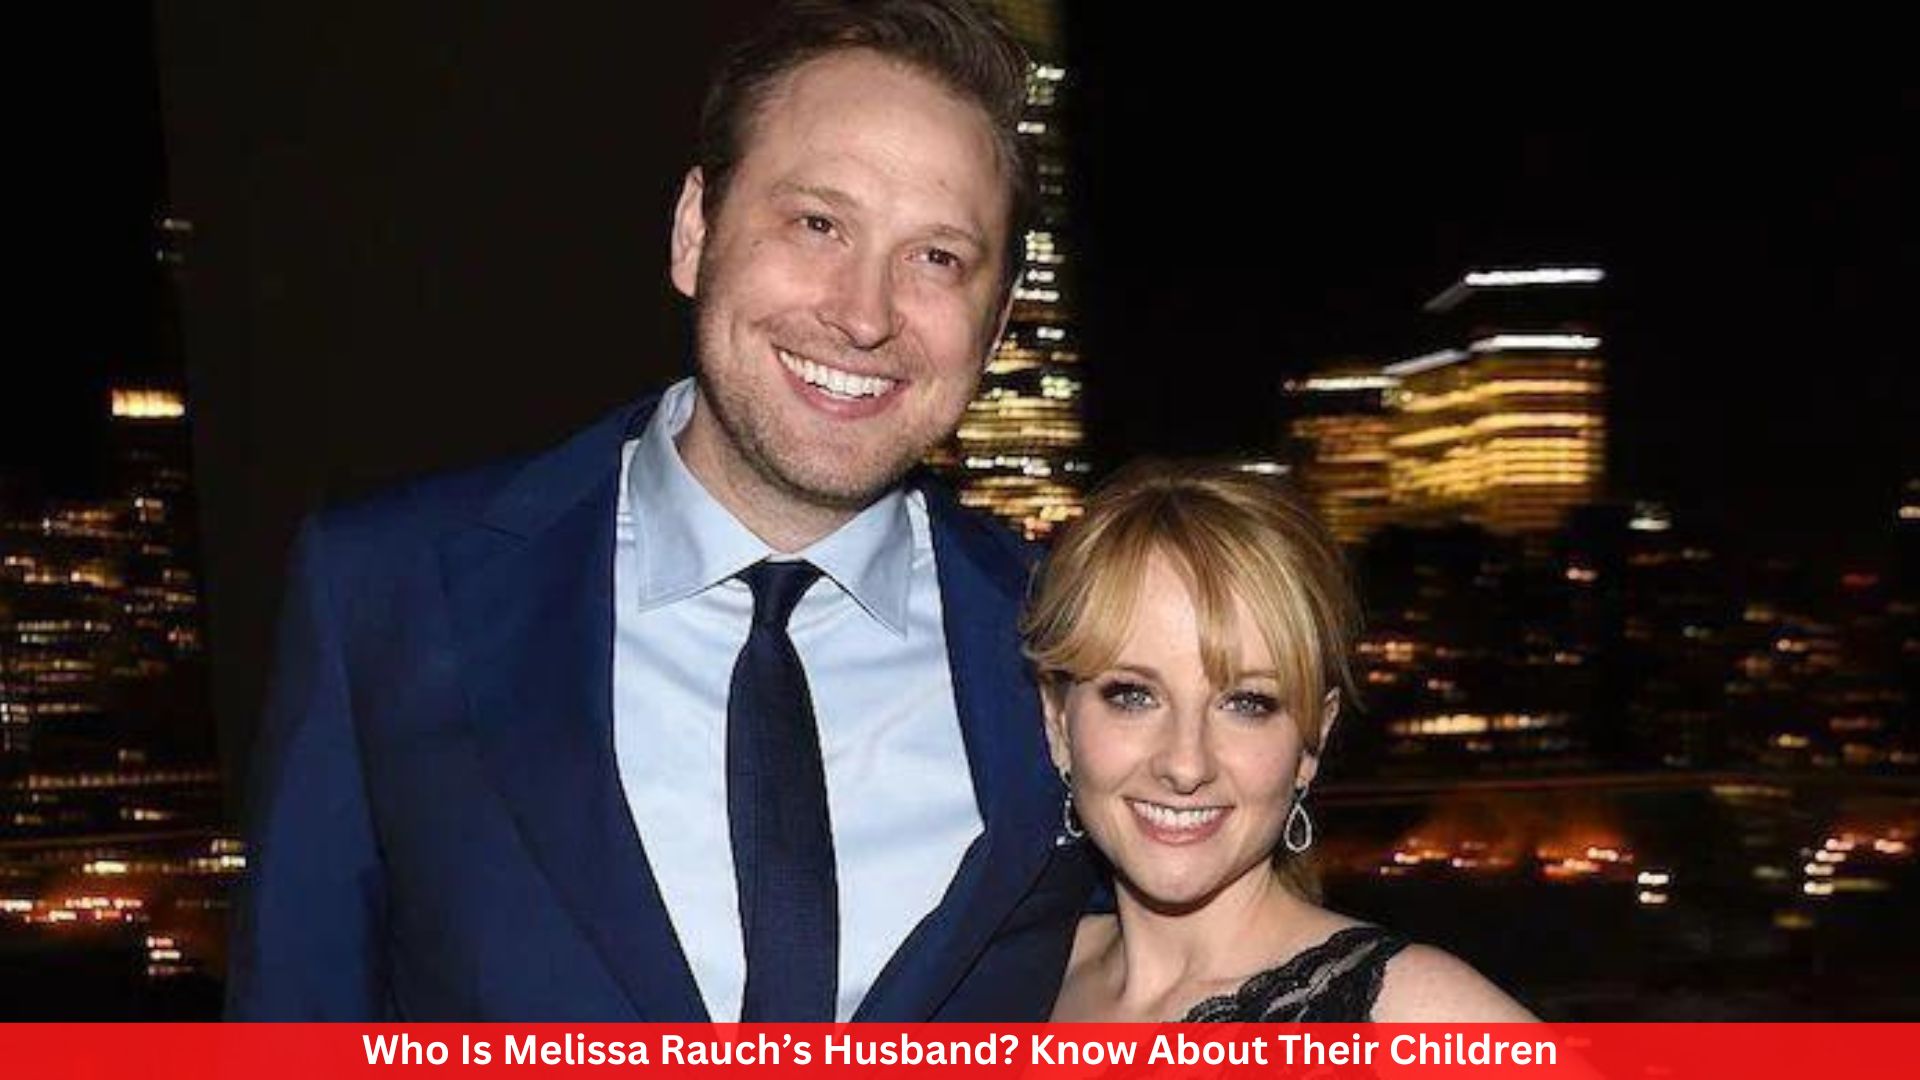 Who Is Melissa Rauch’s Husband? Know About Their Children